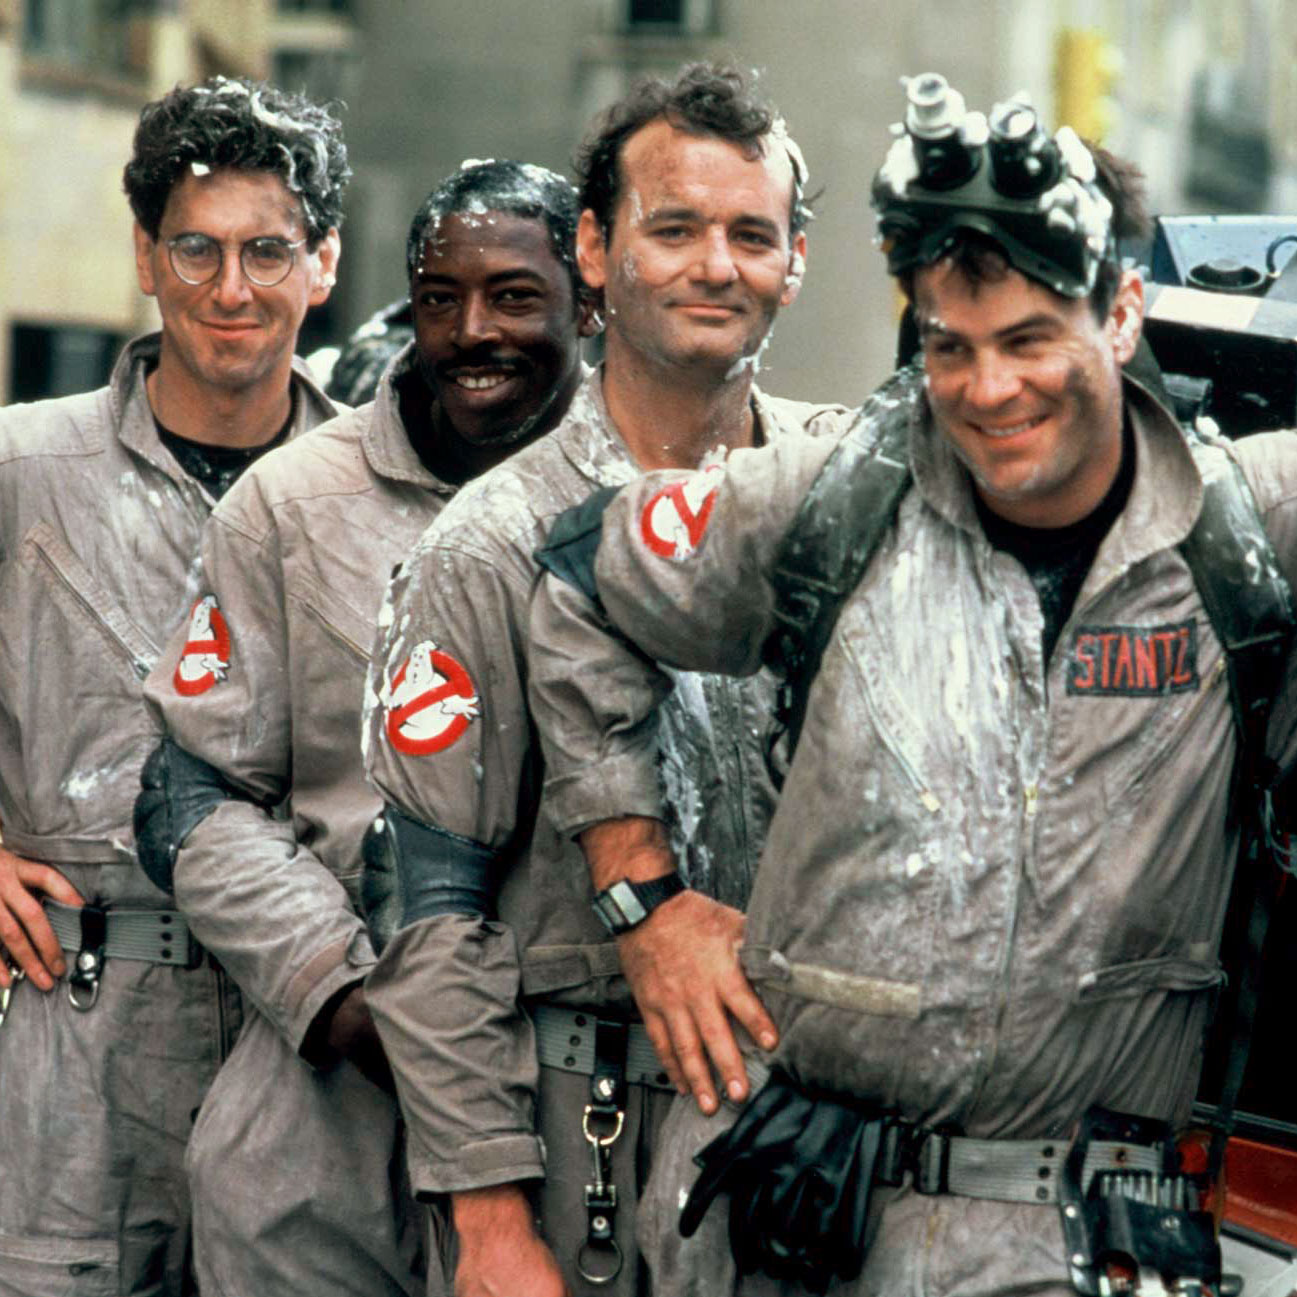 The Ghostbusters in uniform in the movie